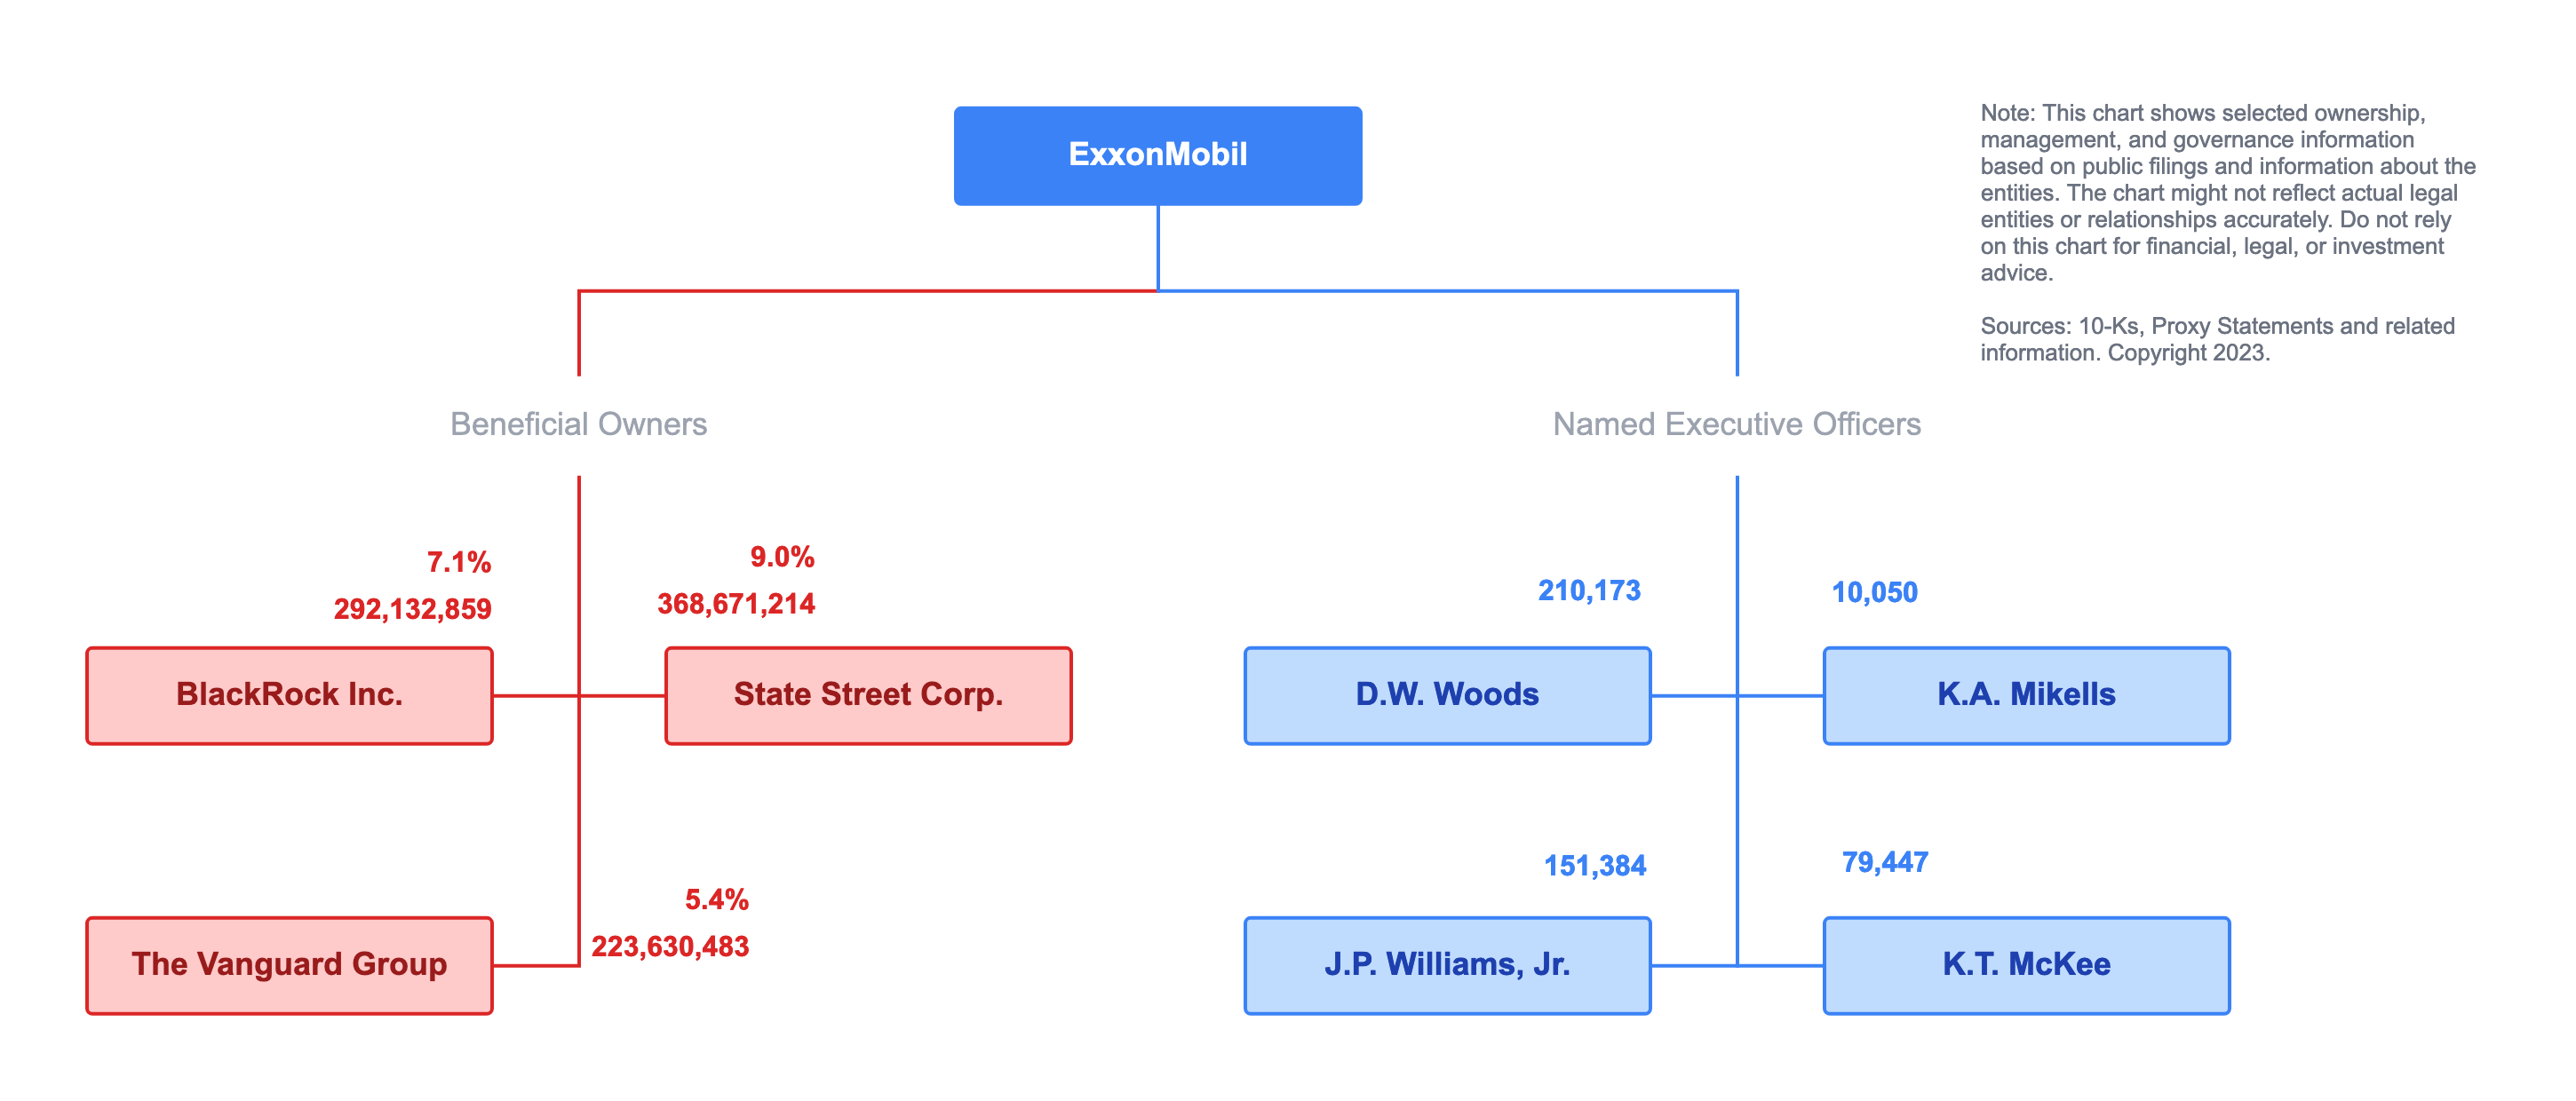 ExxonMobil organization chart showing beneficial owners and named executive officers in 2023